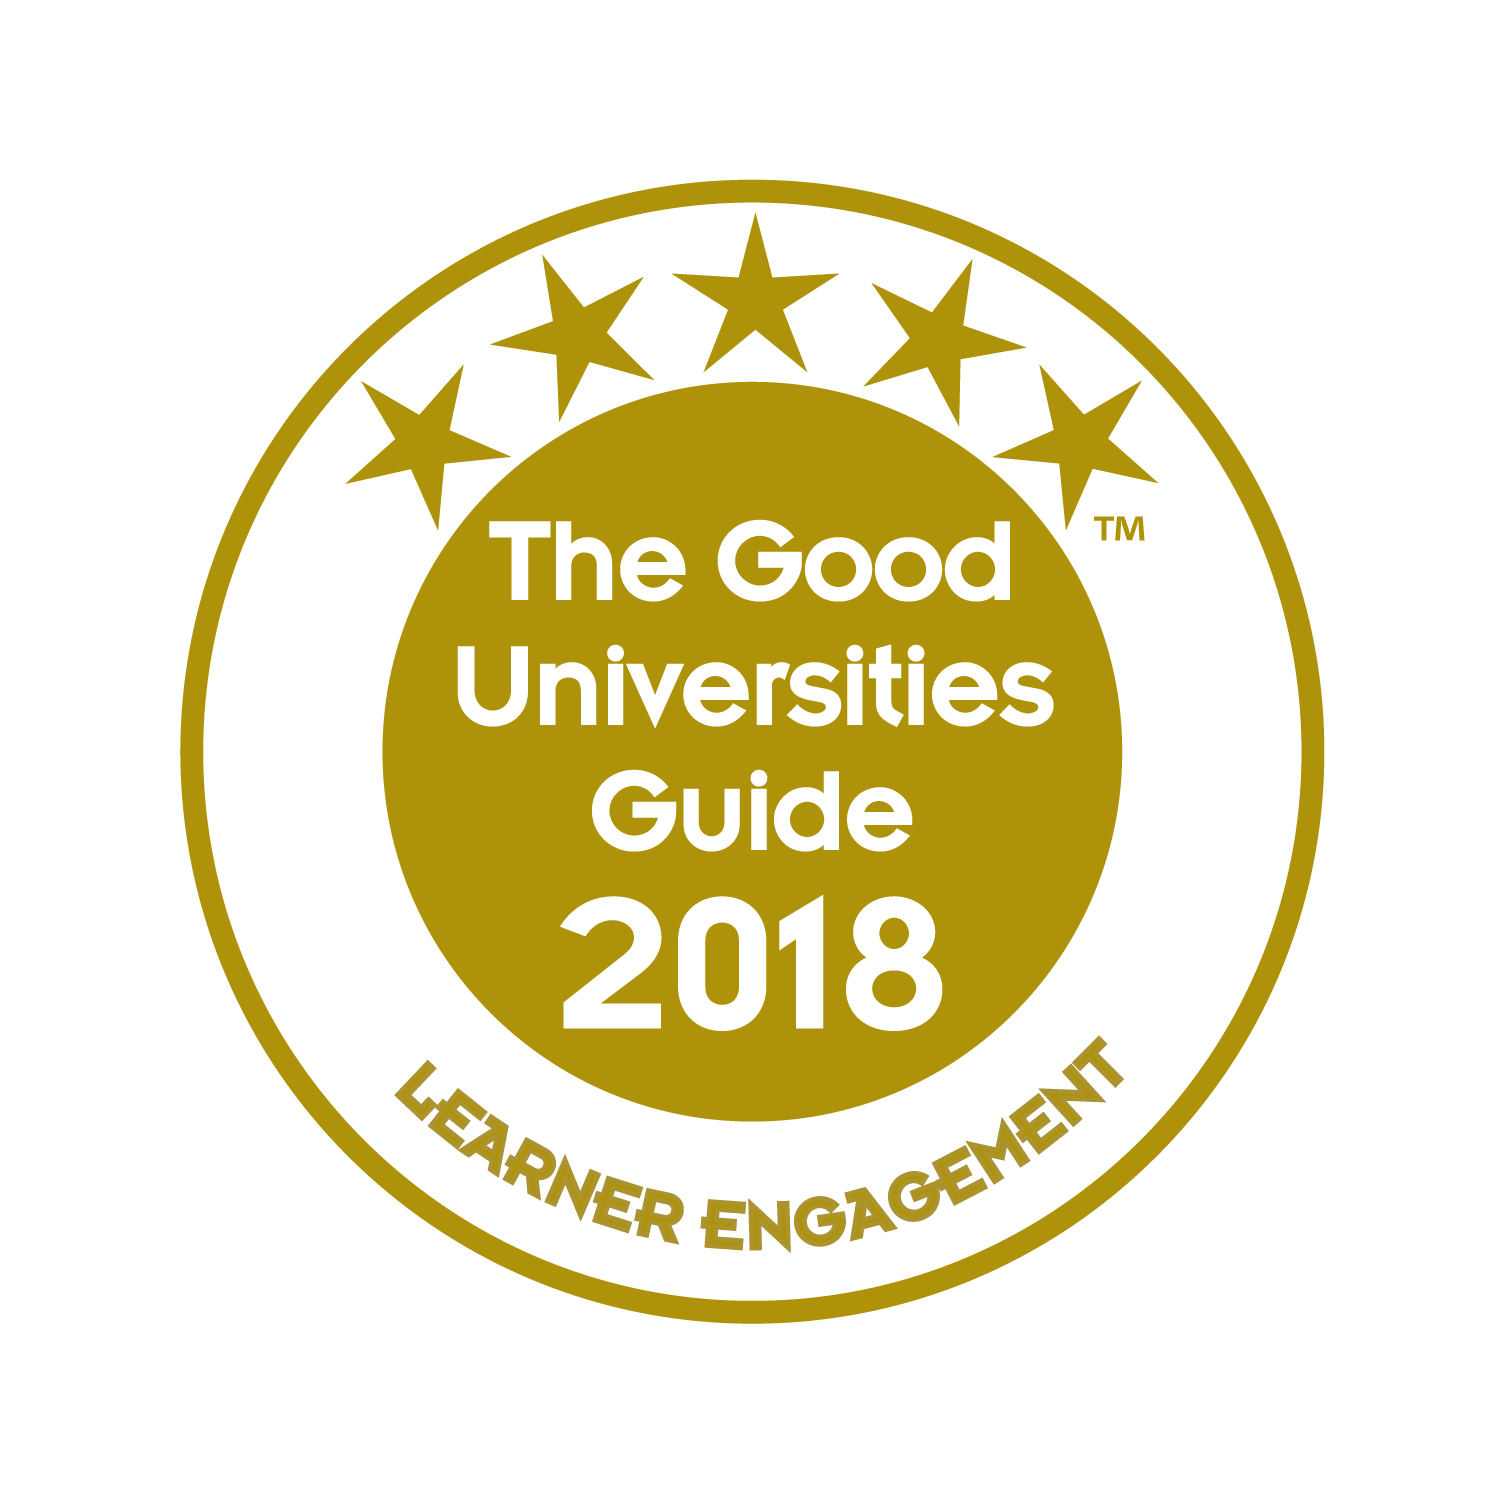 Good universities guide badge for five stars for Learner Engagement. 